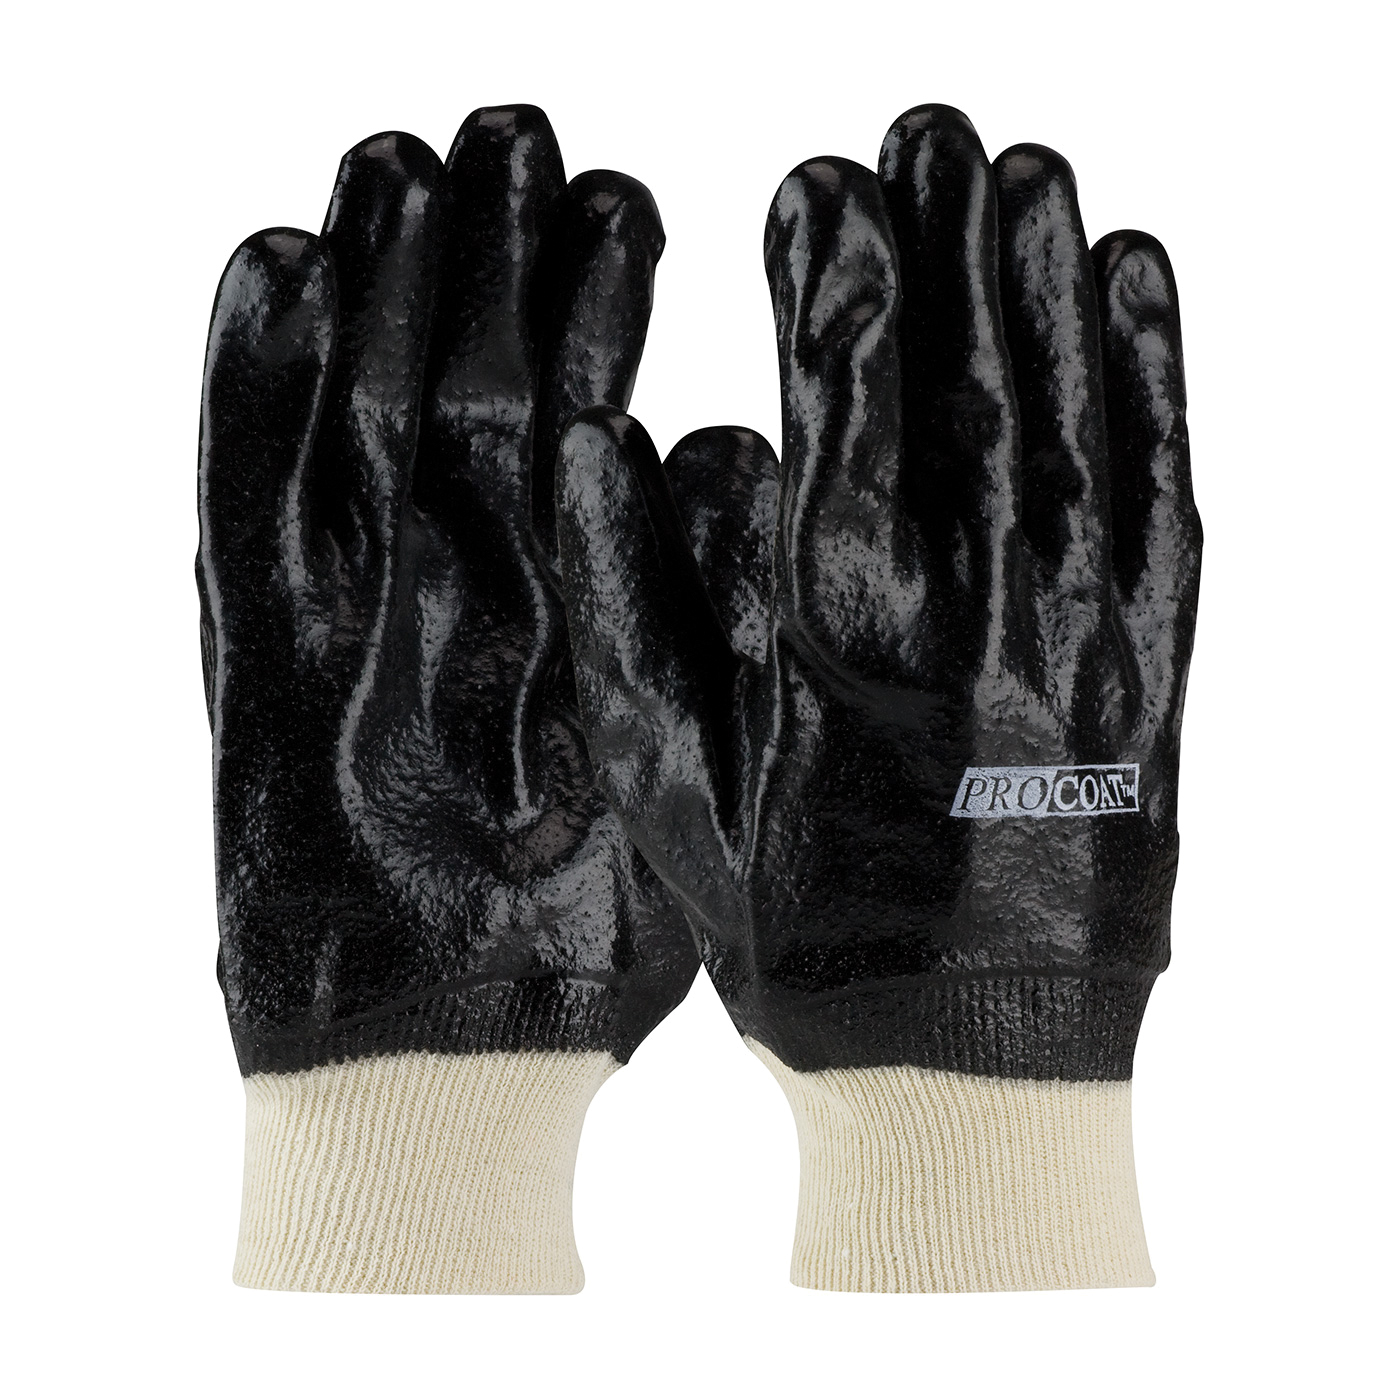 PIP® ProCoat® 58-8015R Men's Single Dipped Chemical-Resistant Gloves, Universal, Cotton, Black, Cotton Interlock Knit Lining, 10 in L, Resists: Abrasion, Cut, Liquid, Oil, Puncture and Tear, Supported Support, Knit Wrist Cuff